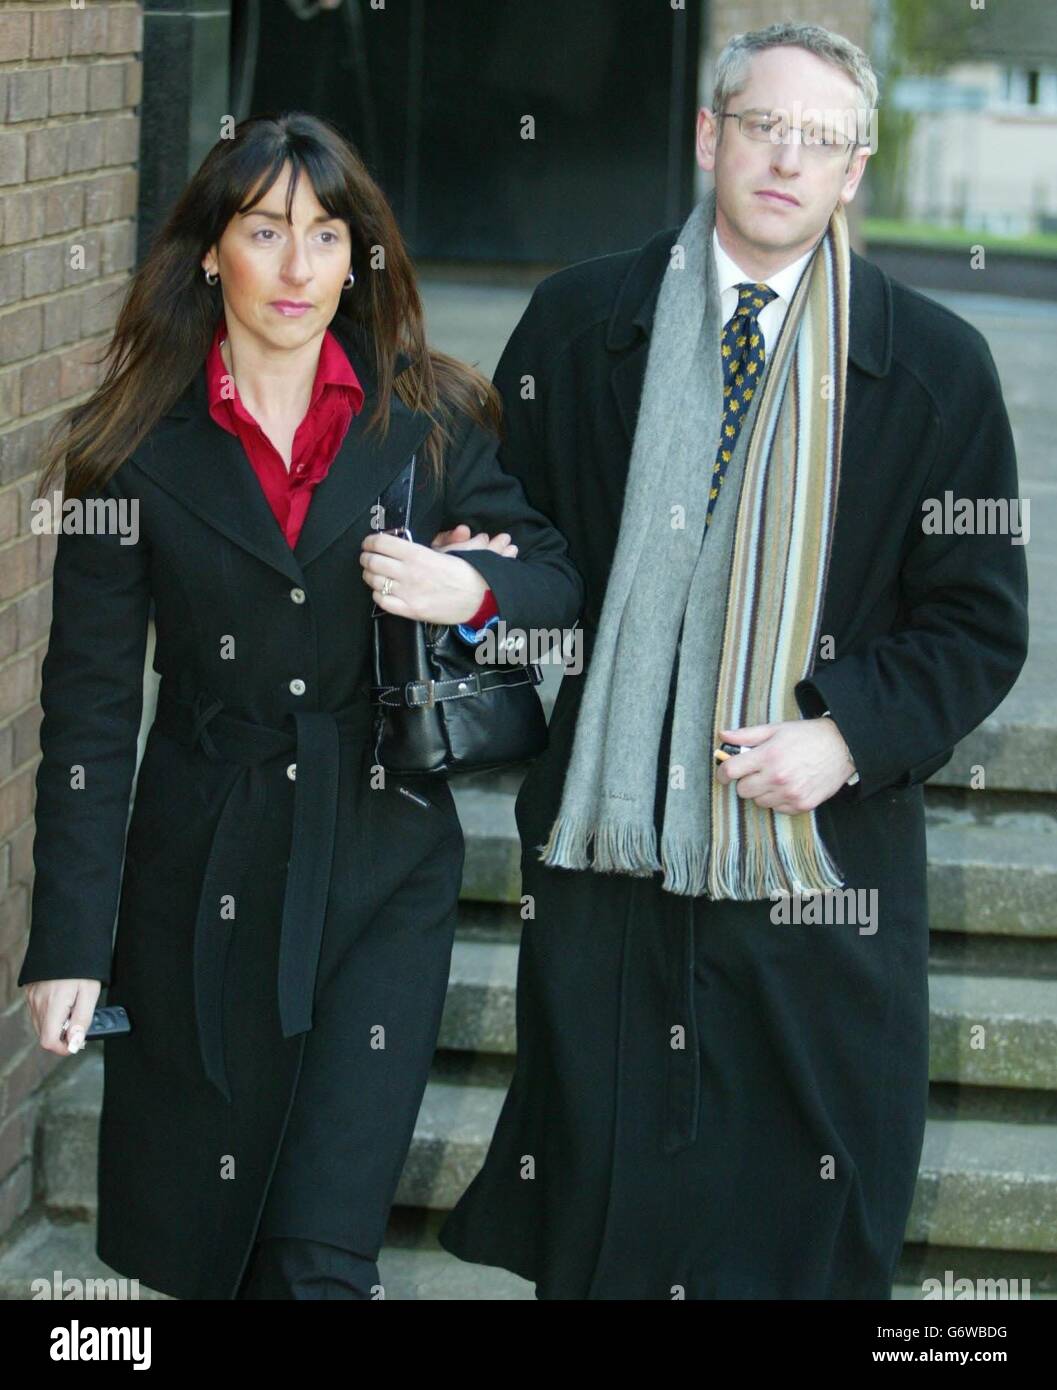 John Walker's son Adrian Walker and his daughter Jane Robson leave Ipswich Crown Court, Suffolk. Their father John Walker is on trial for killing his wife by shooting her at the breakfast table at their home in Grt Bealings, Suffolk. Stock Photo